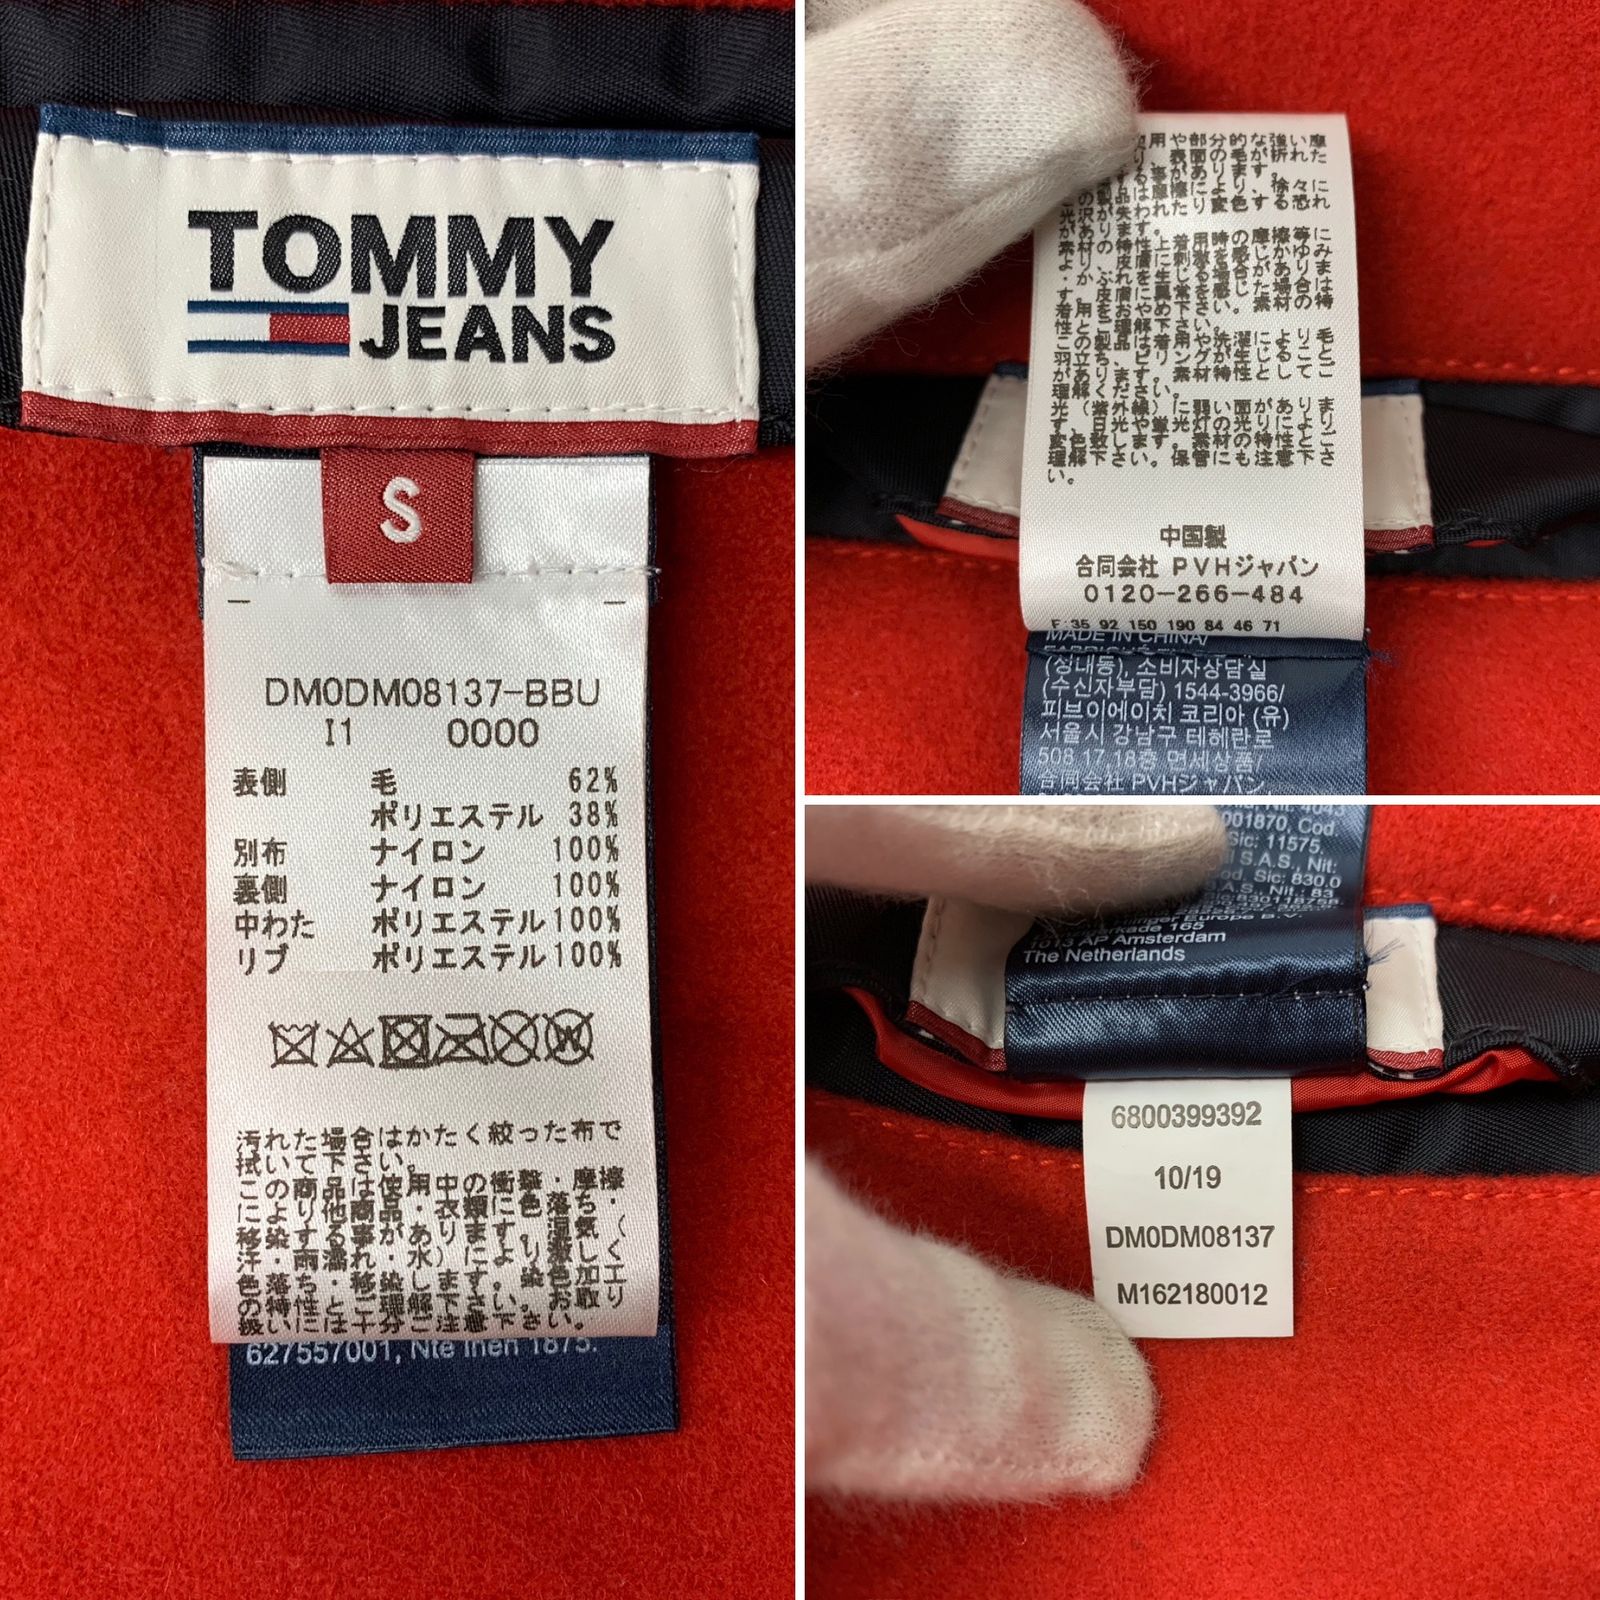 TOMMY JEANS (トミージーンズ) リバーシブル ウールスタジャン